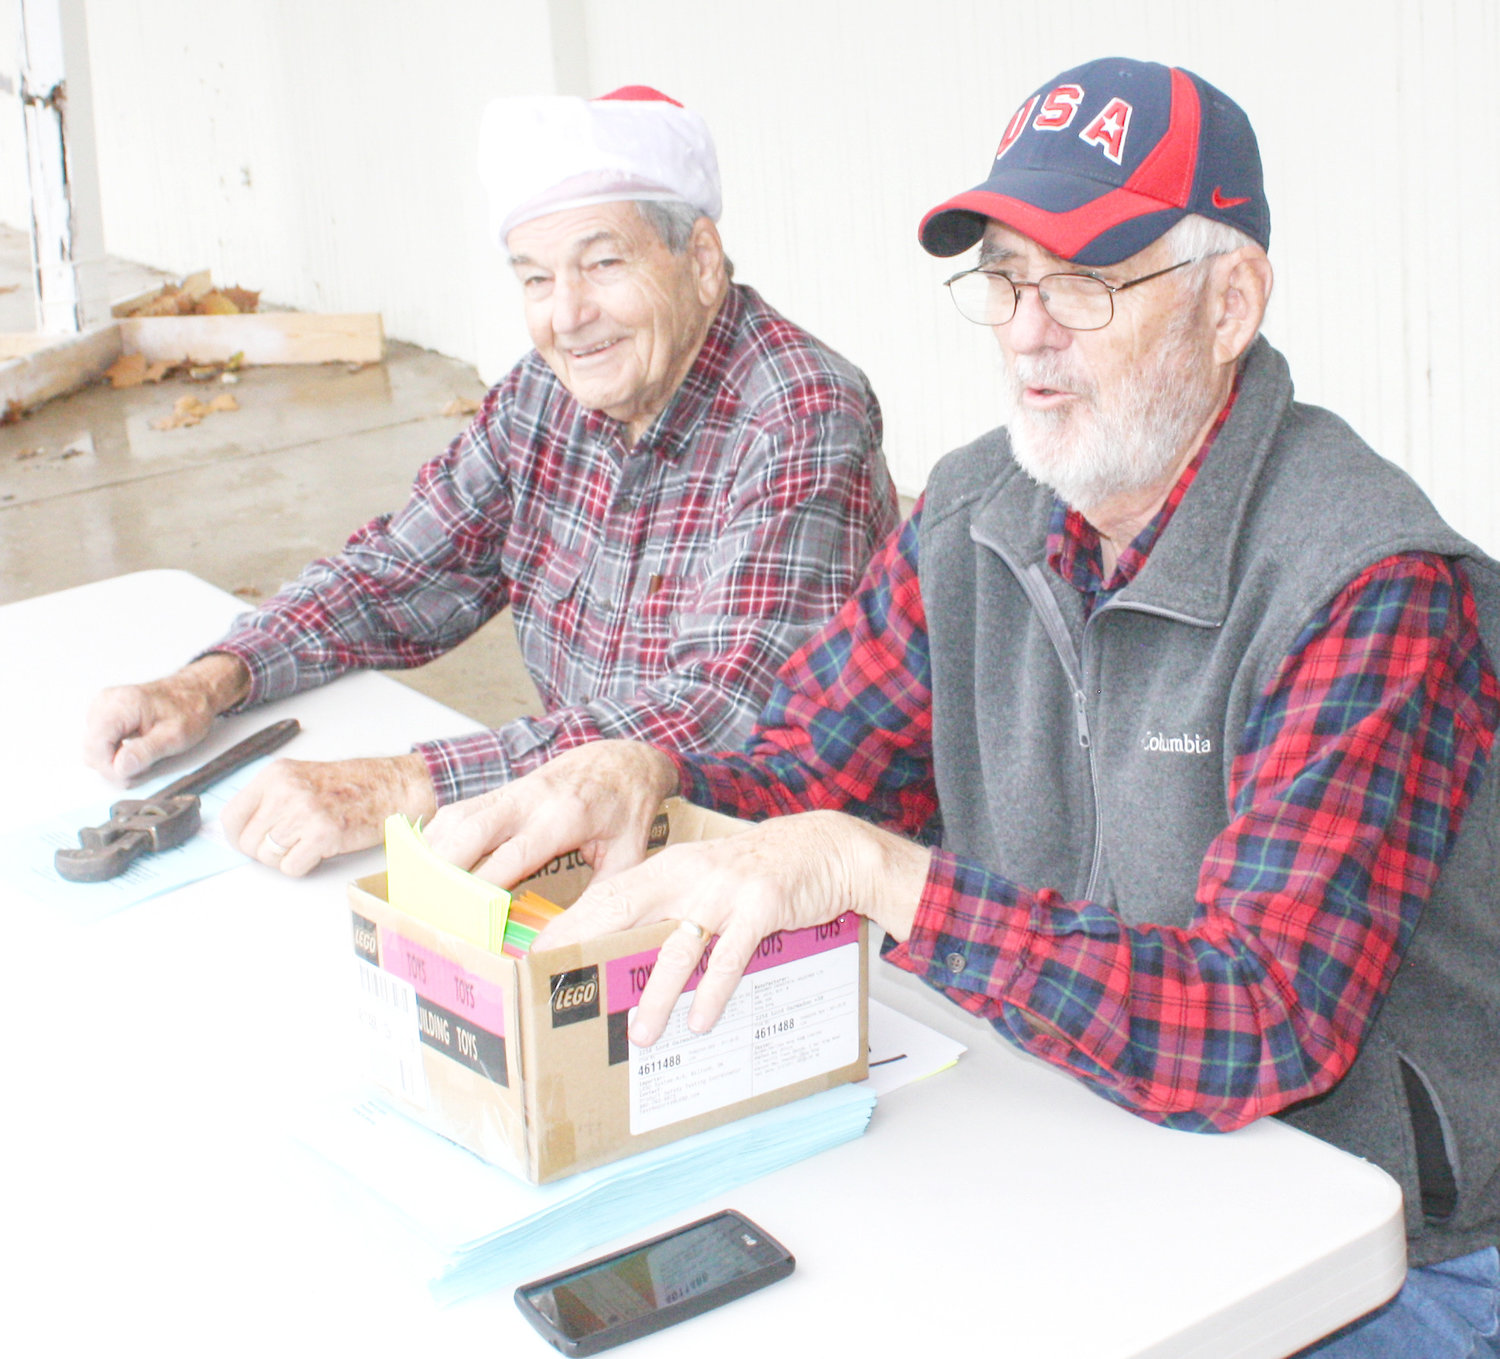 Manning the check-in table at Saturday’s Mineola Caring & Sharing Christmas distribution were Wayne Williams, right, and Gene Strause. Williams has been a volunteer for this project for over 20 years.